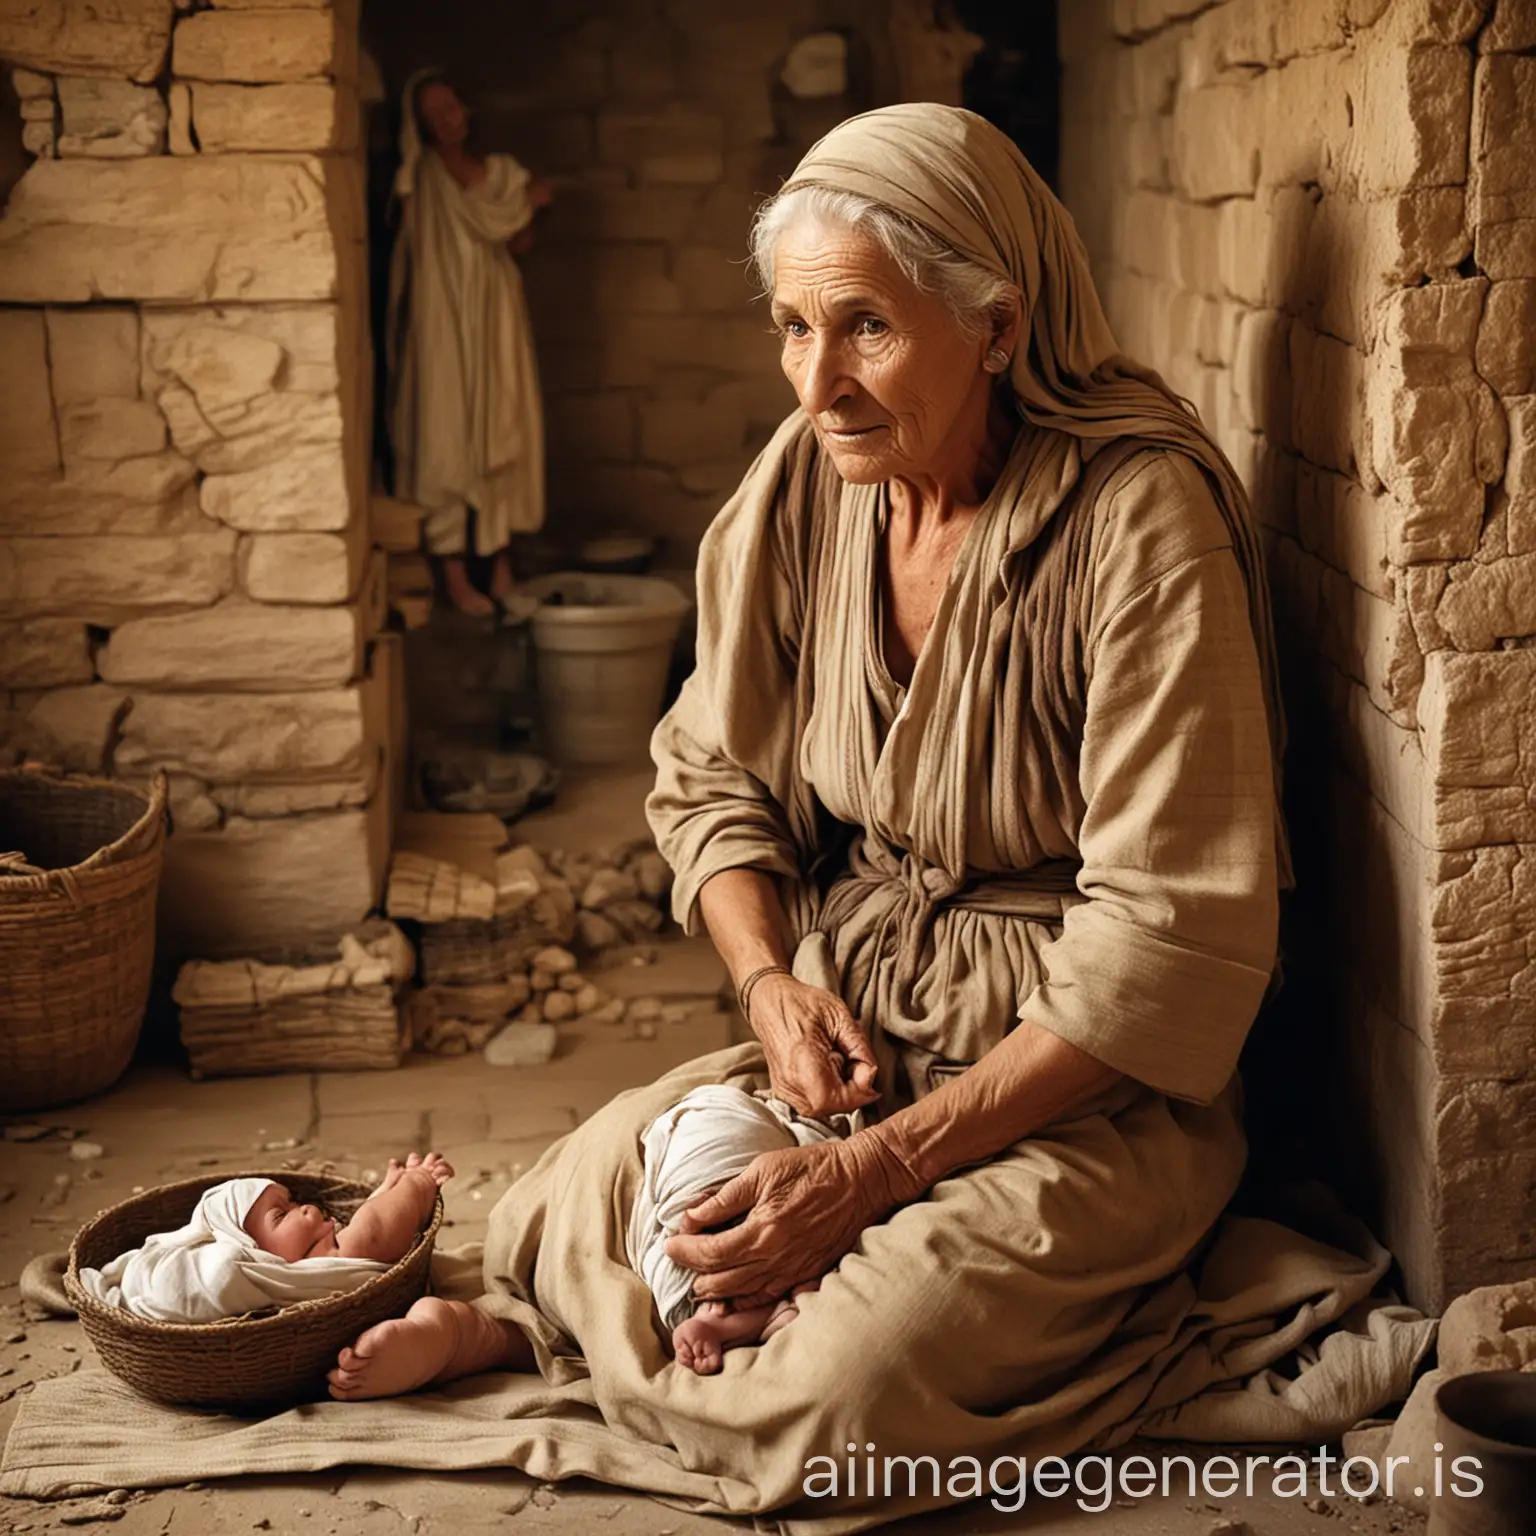 Ancient-Israel-Scene-Elderly-Woman-Caring-for-Infant-in-Home-Setting